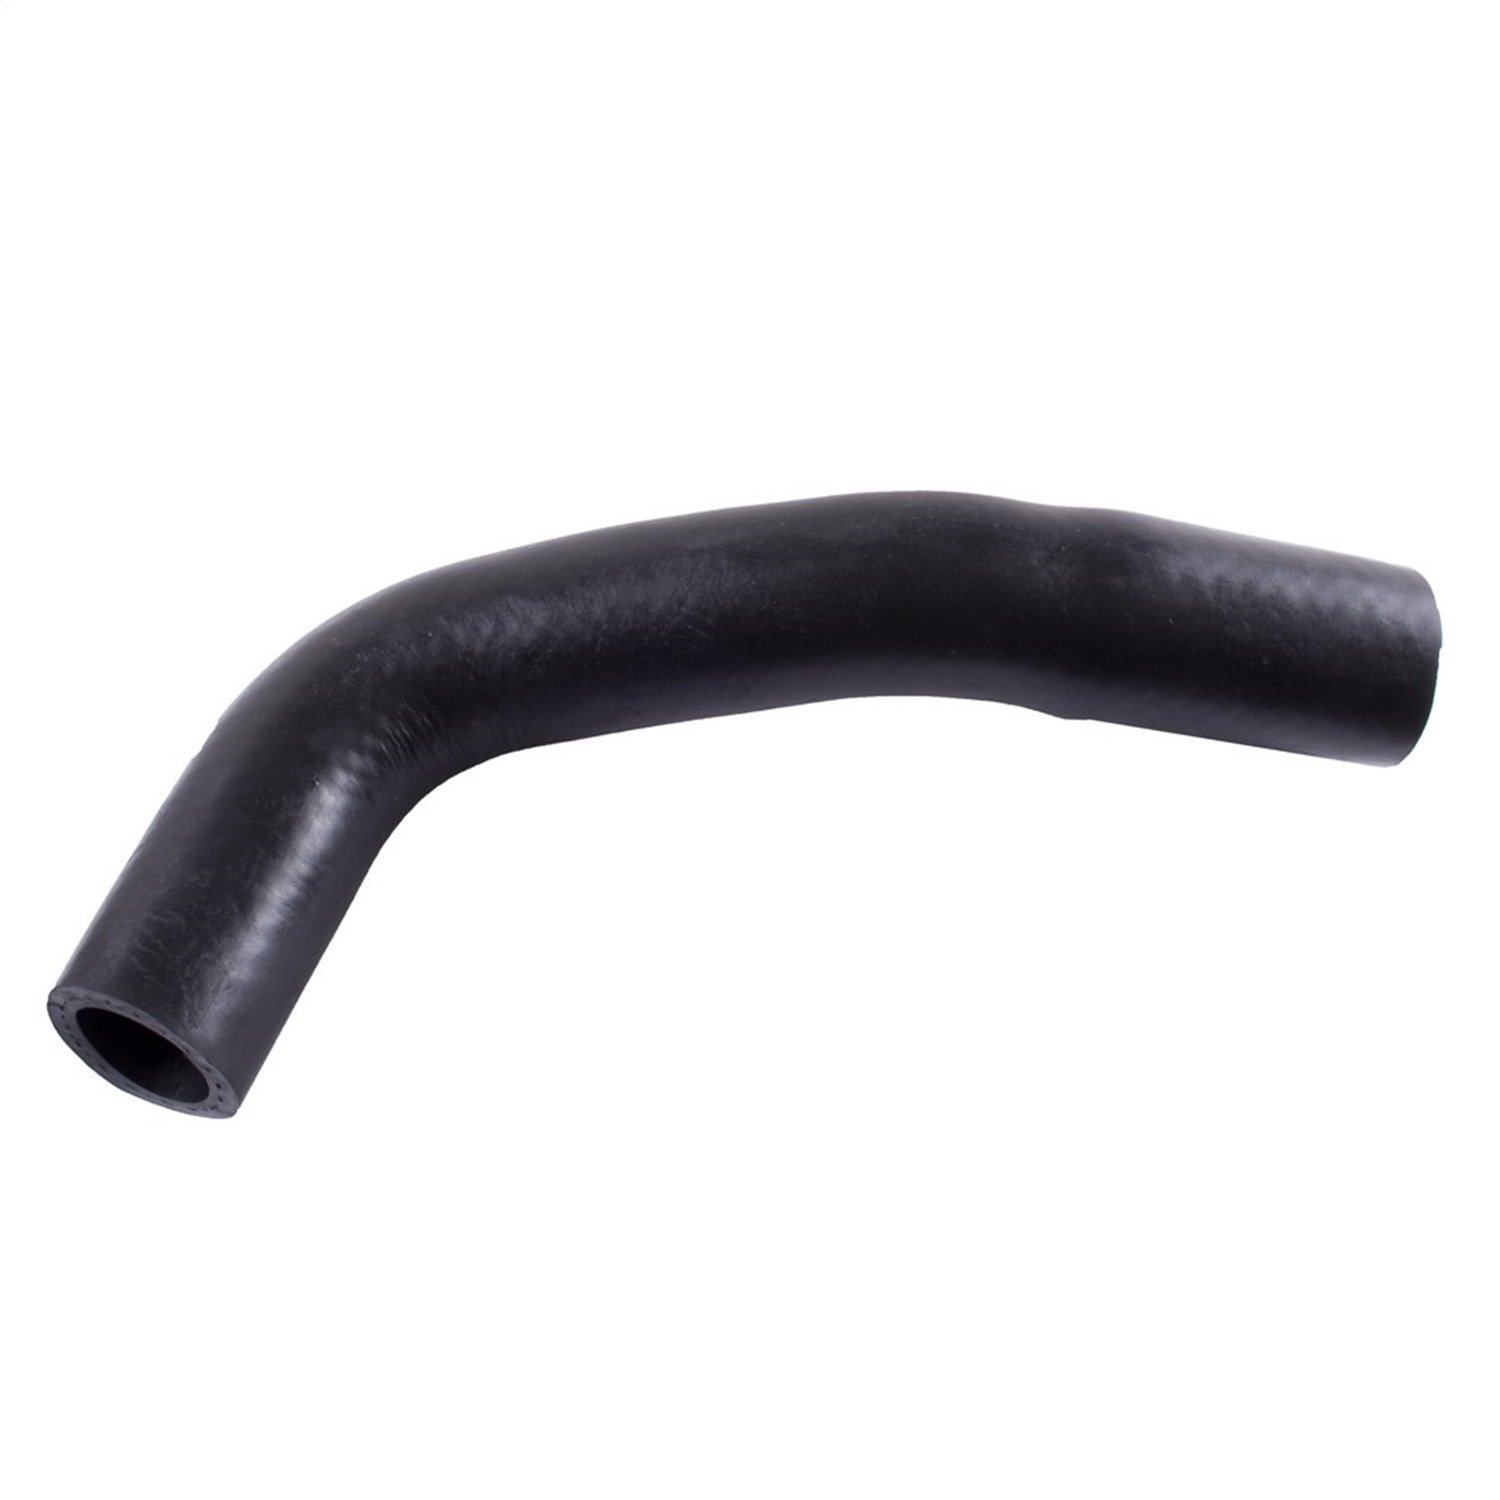 Replacement gas tank filler hose from Omix-ADA, Fits factory 20 gallon plastic tanks and 15